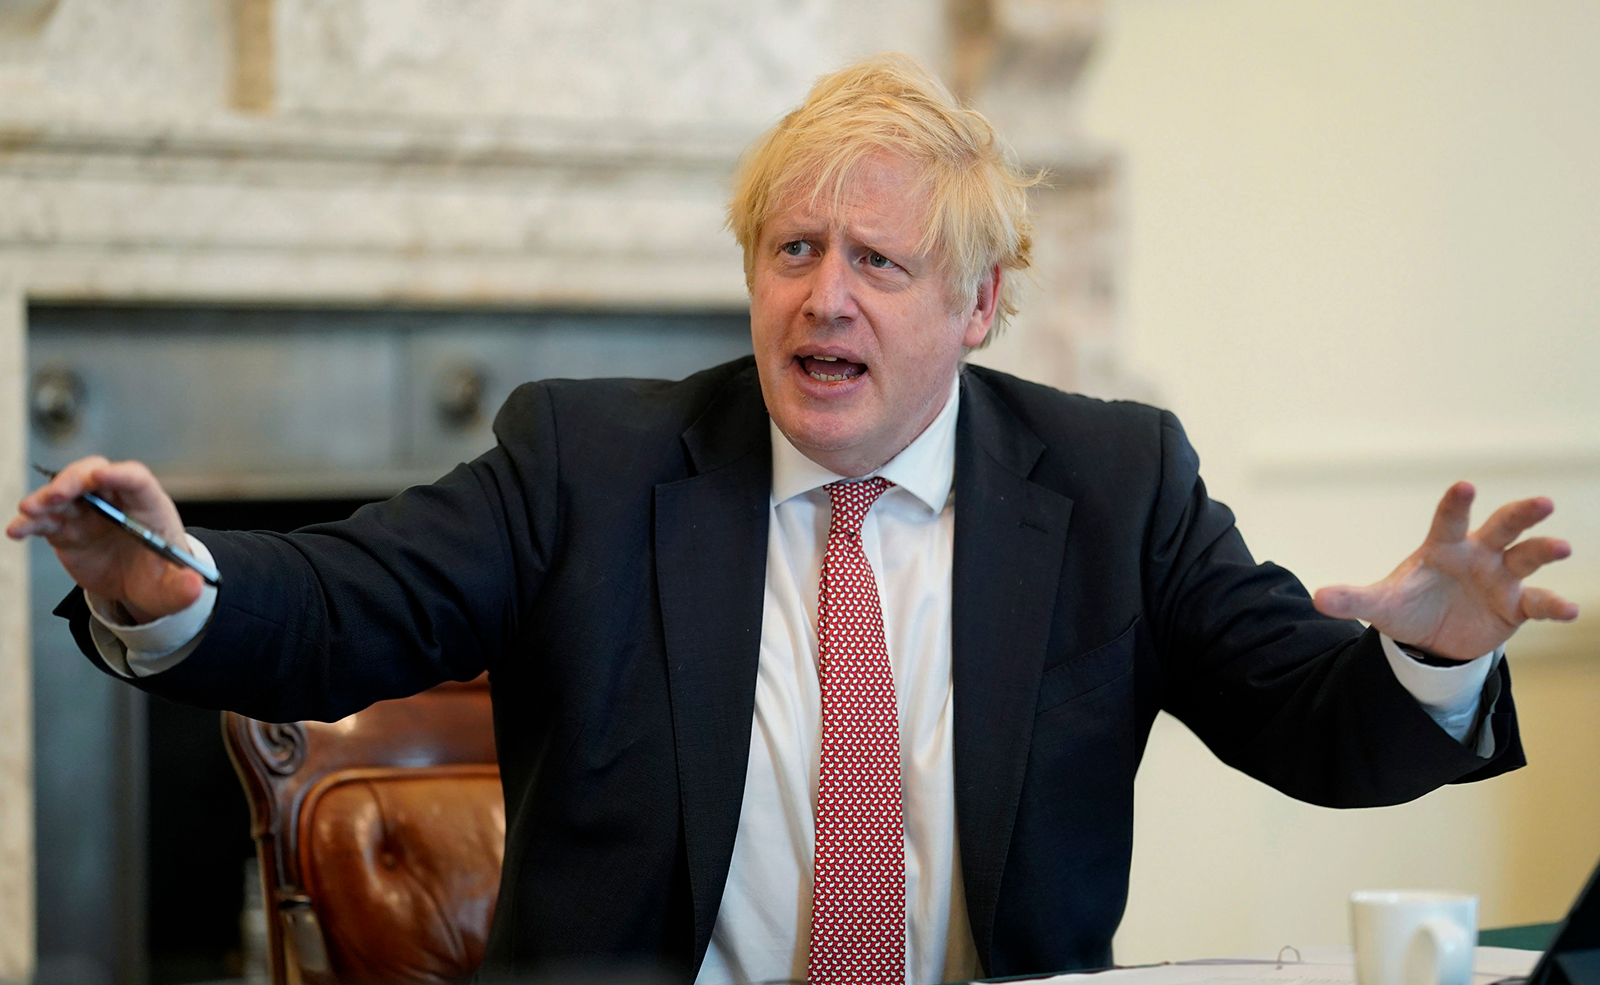 Britain's Prime Minister Boris Johnson chairs his first digital Cabinet meeting on Thursday since returning to work after contracting coronavirus and the birth of his new son.